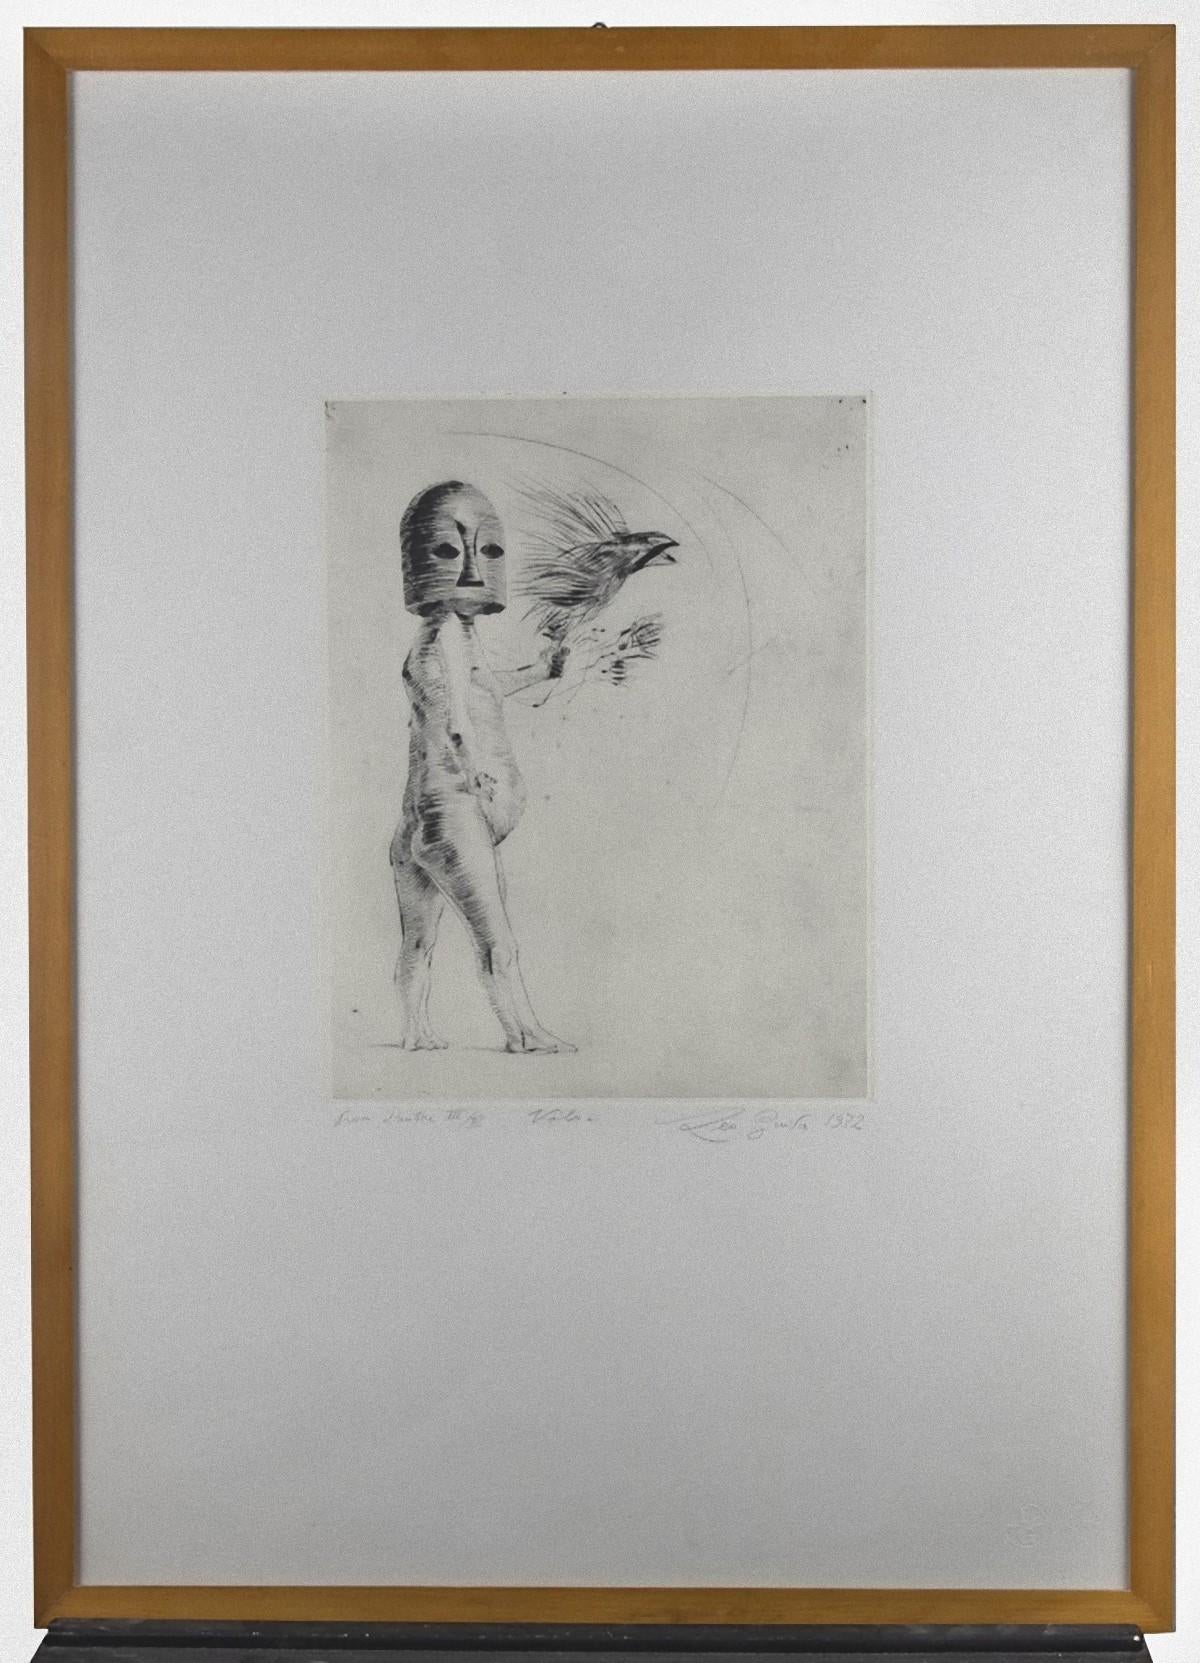 Vola - Original Etching and Drypoint on Paper by Leo Guida - 1972